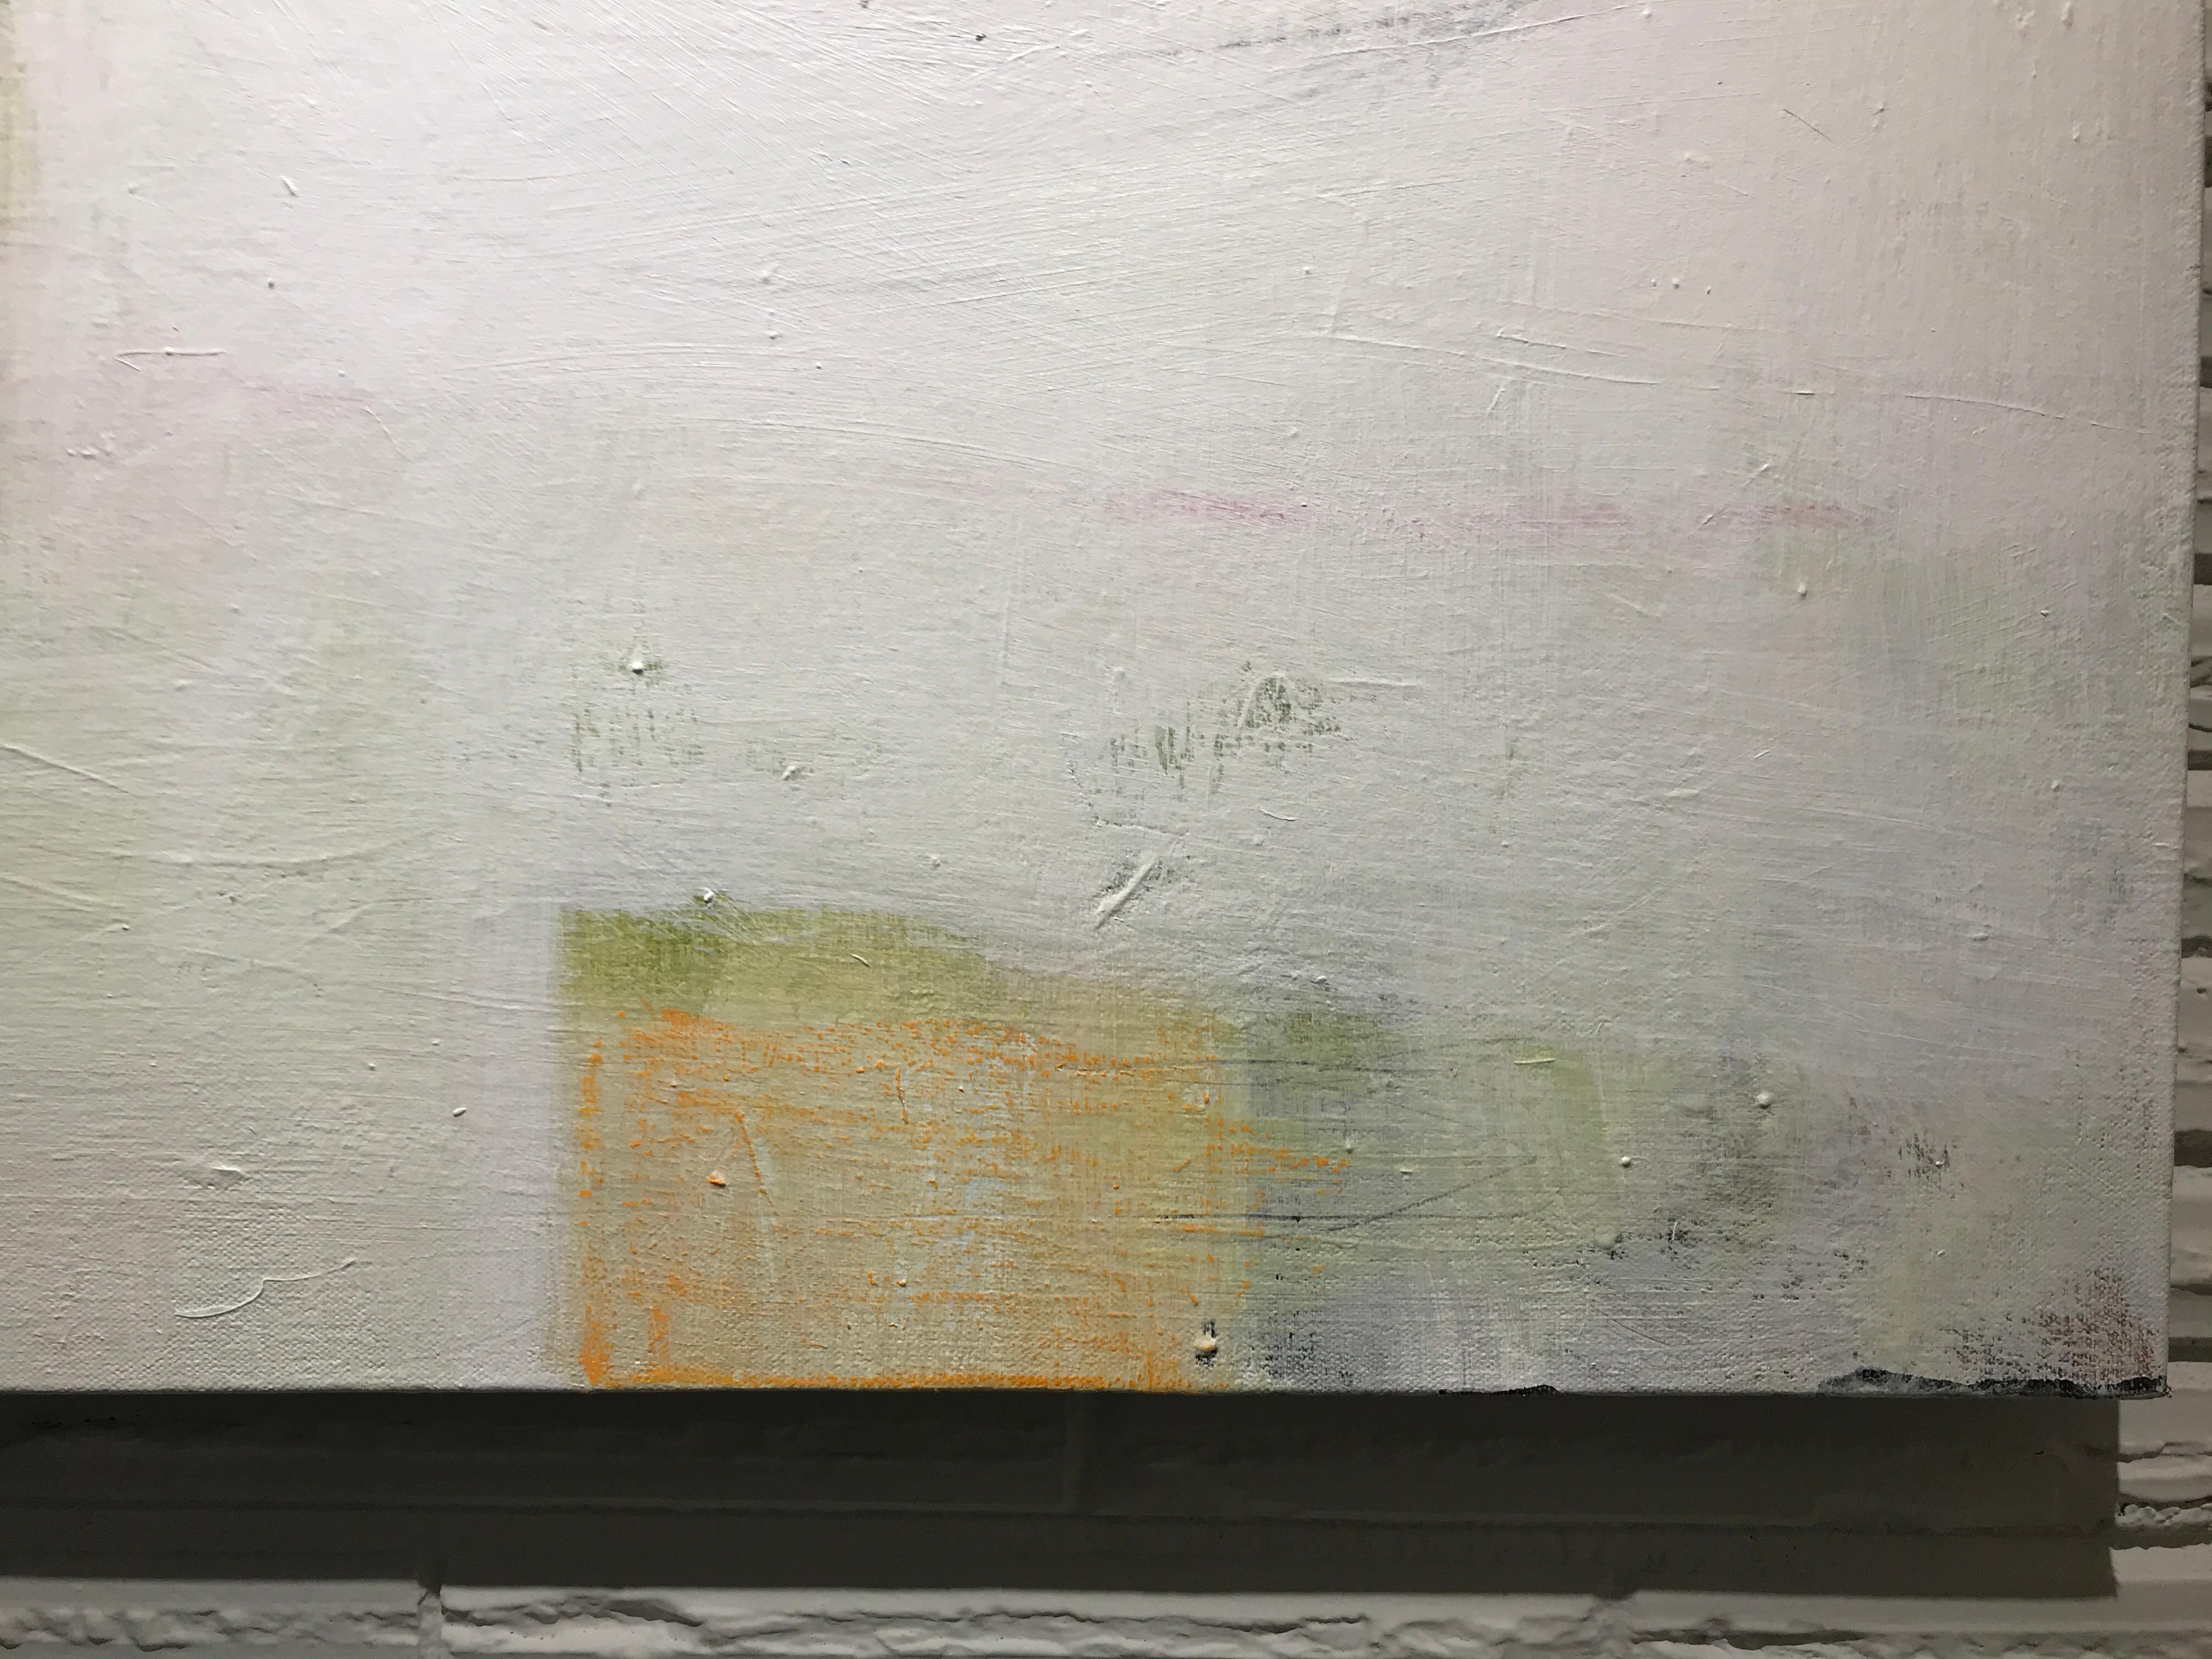 'Treasured' is a large abstract acrylic and mixed media on canvas painting of square format created by American artist Ellen Rolli in 2018. Featuring a soft palette mostly made of white, green and grey tones, the painting exudes an undeniable sense